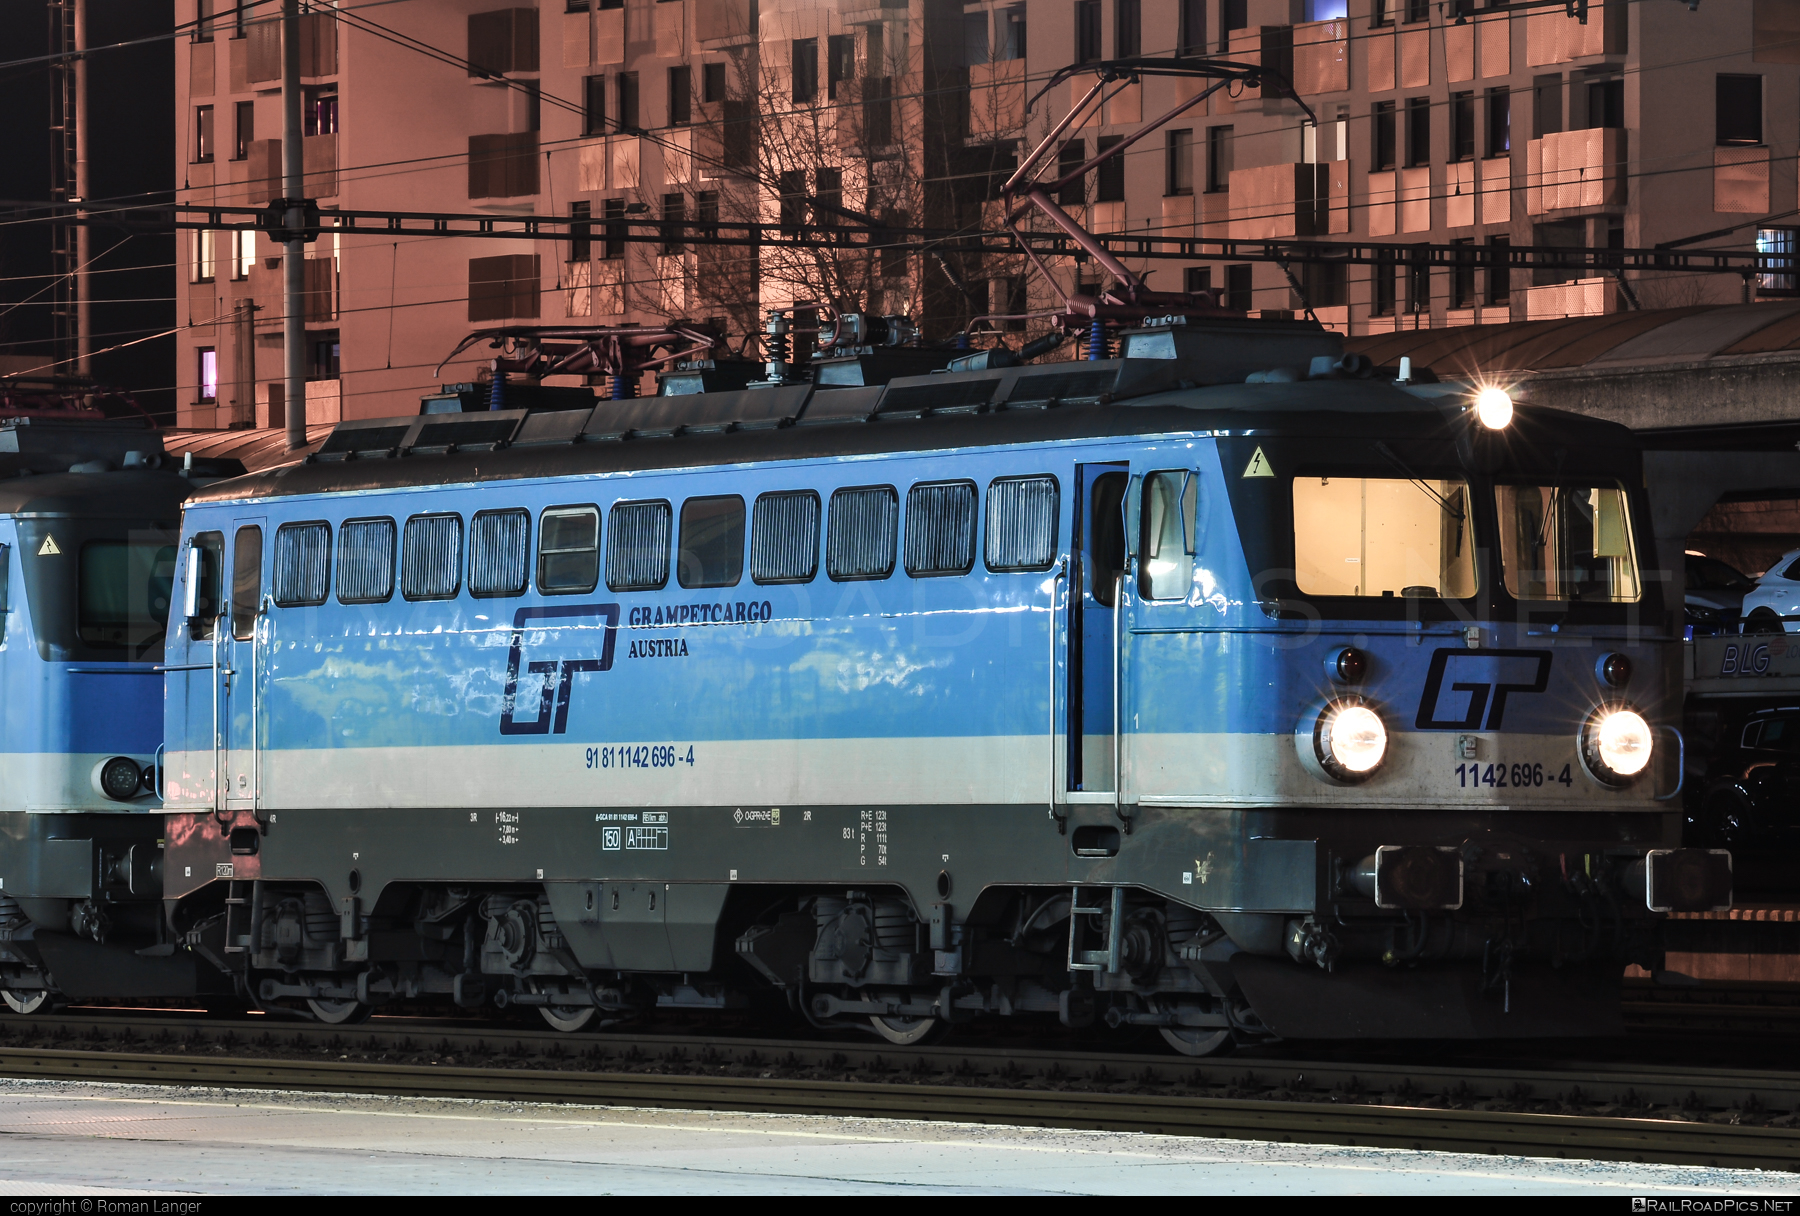 SGP 1142 - 1142 696-4 operated by Grampetcargo Austria #GrampetcargoAustria #grampetcargo #obb1142 #obbClass1142 #sgp #sgp1142 #simmeringgrazpauker